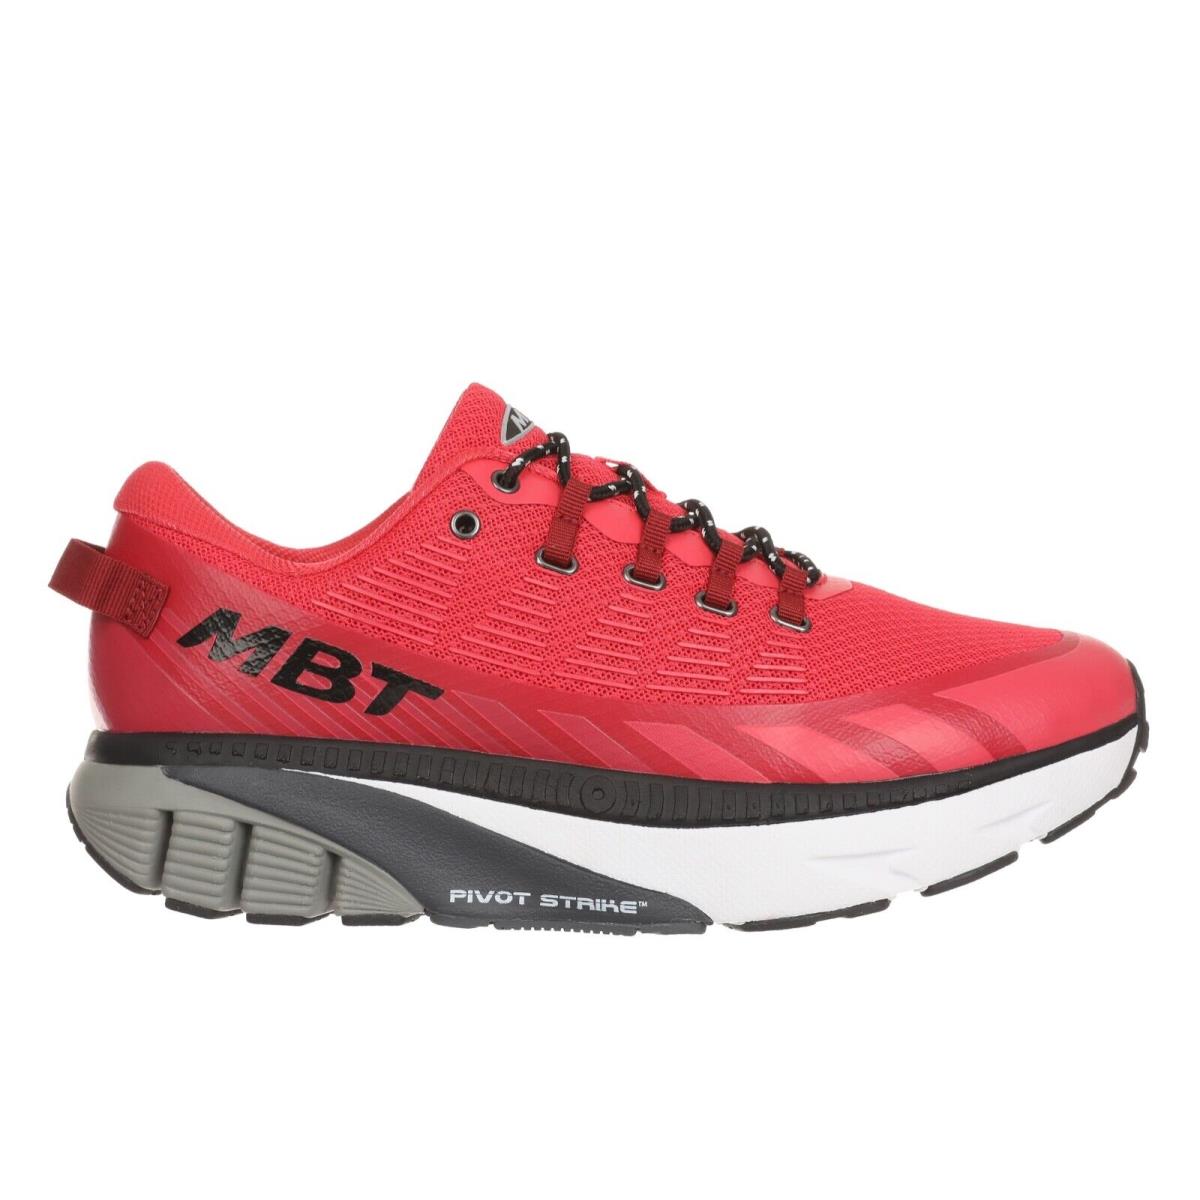 Mbt Mens MTR-1500 Trainer w/ Light Weight Level 2 Rock Mesh 8 Colors MTR-15000-TRAINER-RED